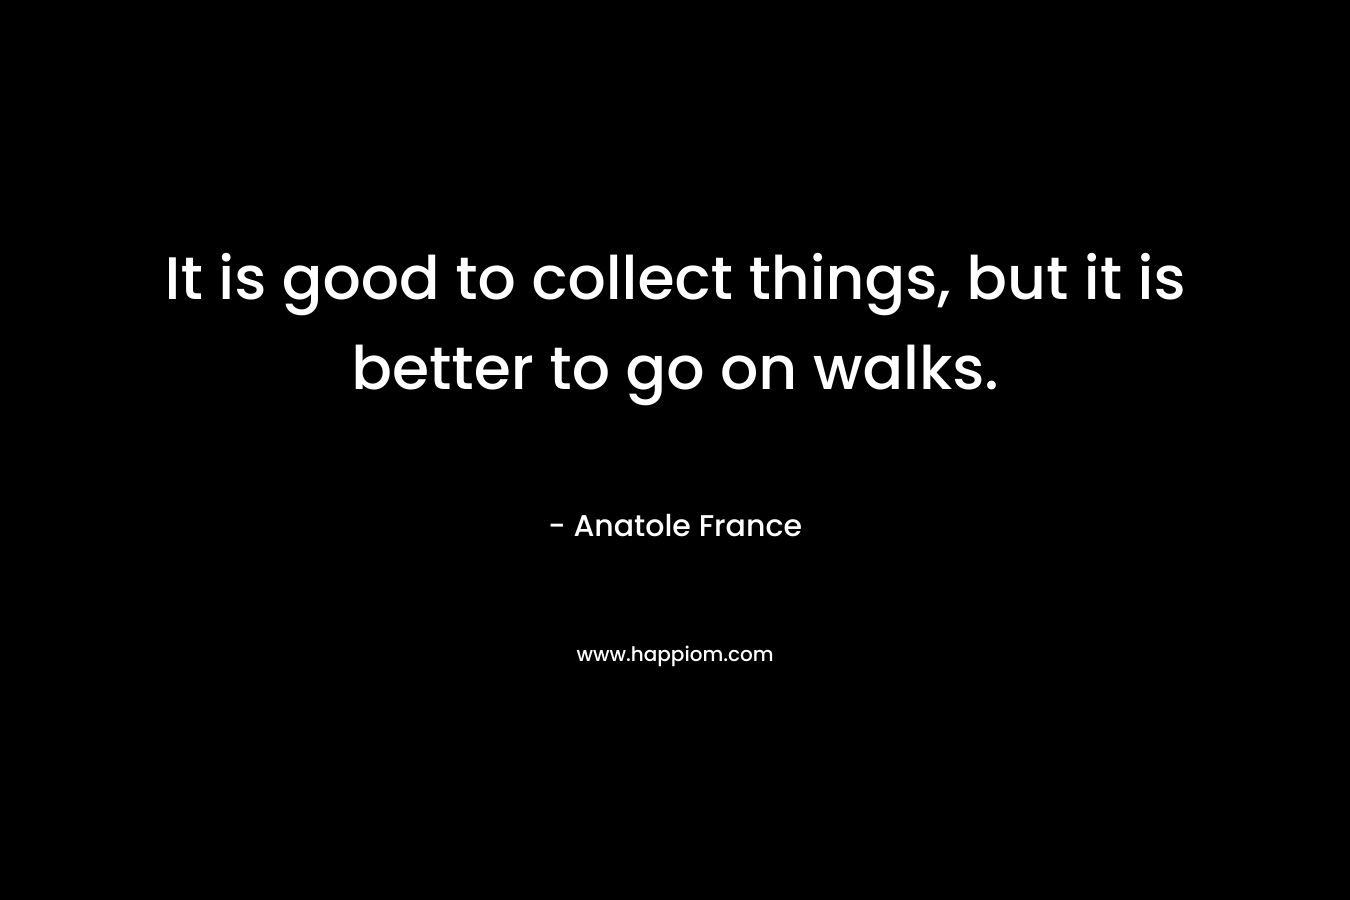 It is good to collect things, but it is better to go on walks. – Anatole France